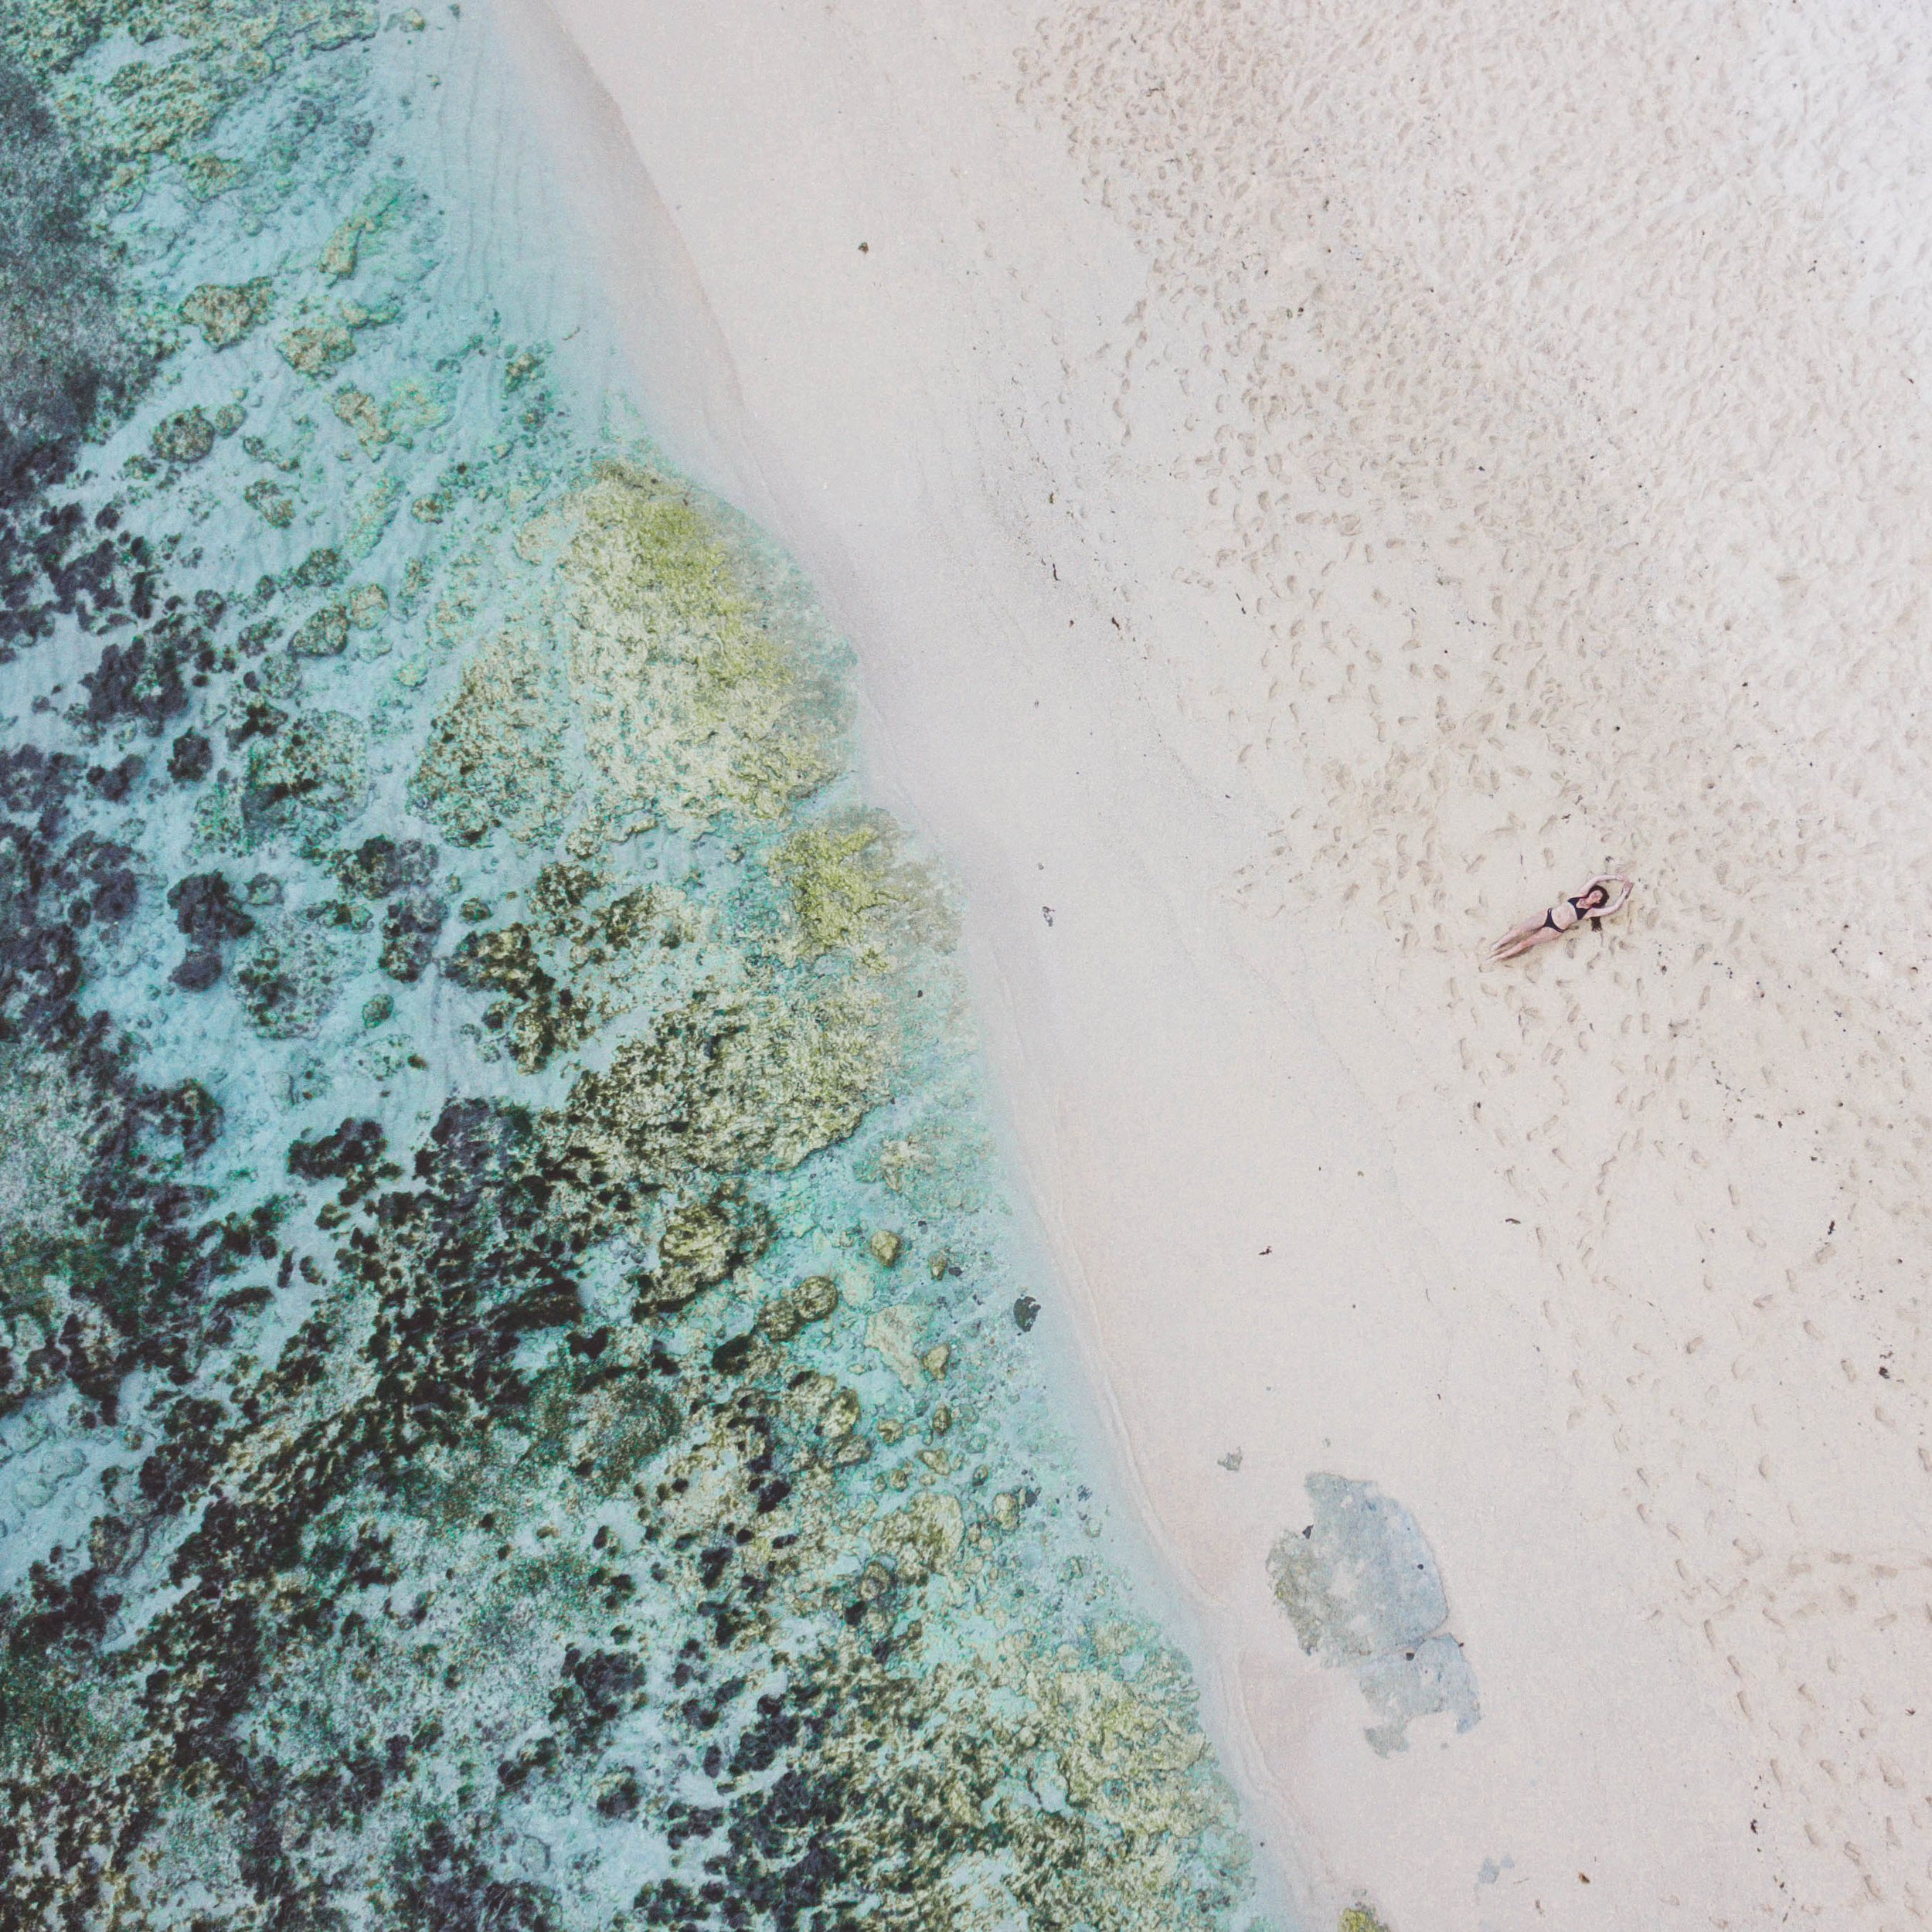 Me on the Beach, by drone - Magpupungko Beach - Siargao - Philippines